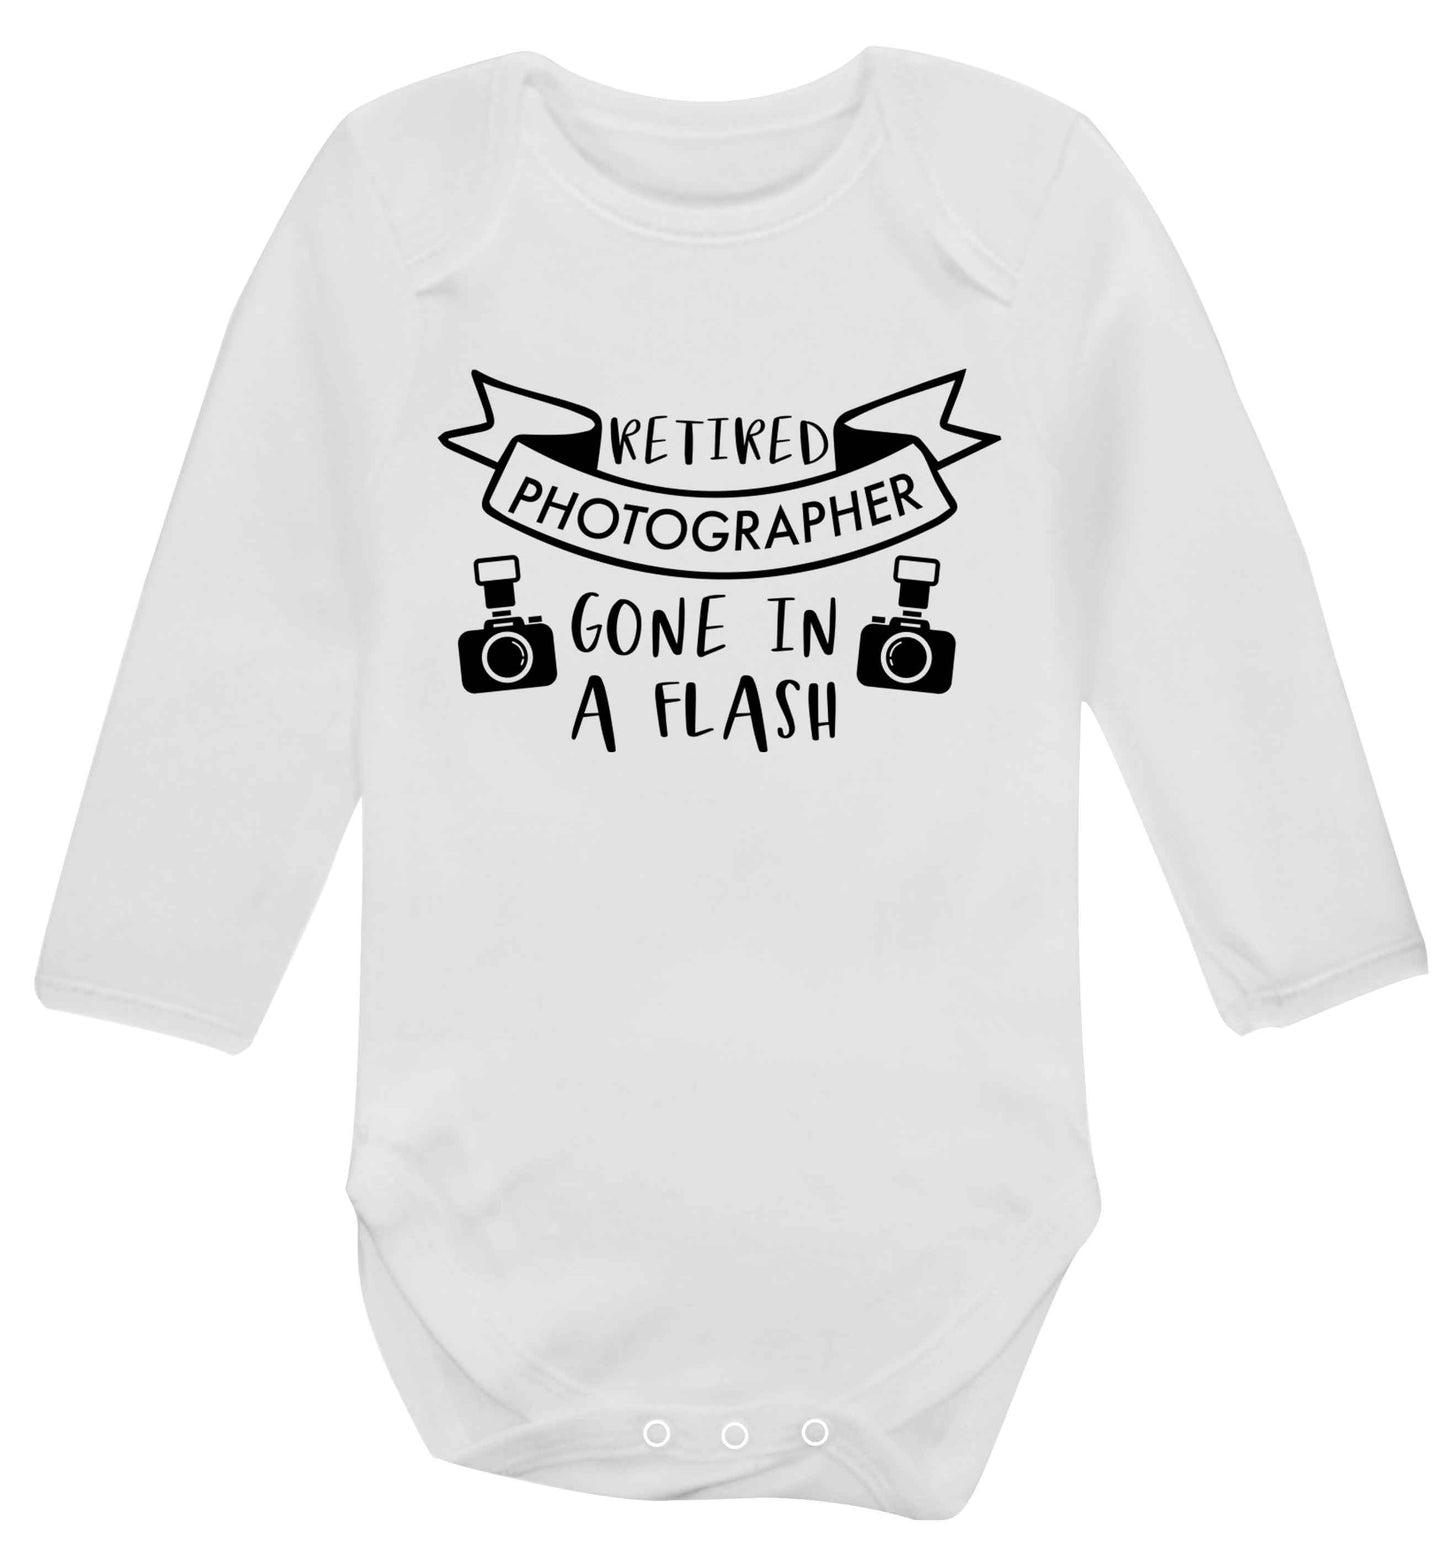 Retired photographer gone in a flash Baby Vest long sleeved white 6-12 months